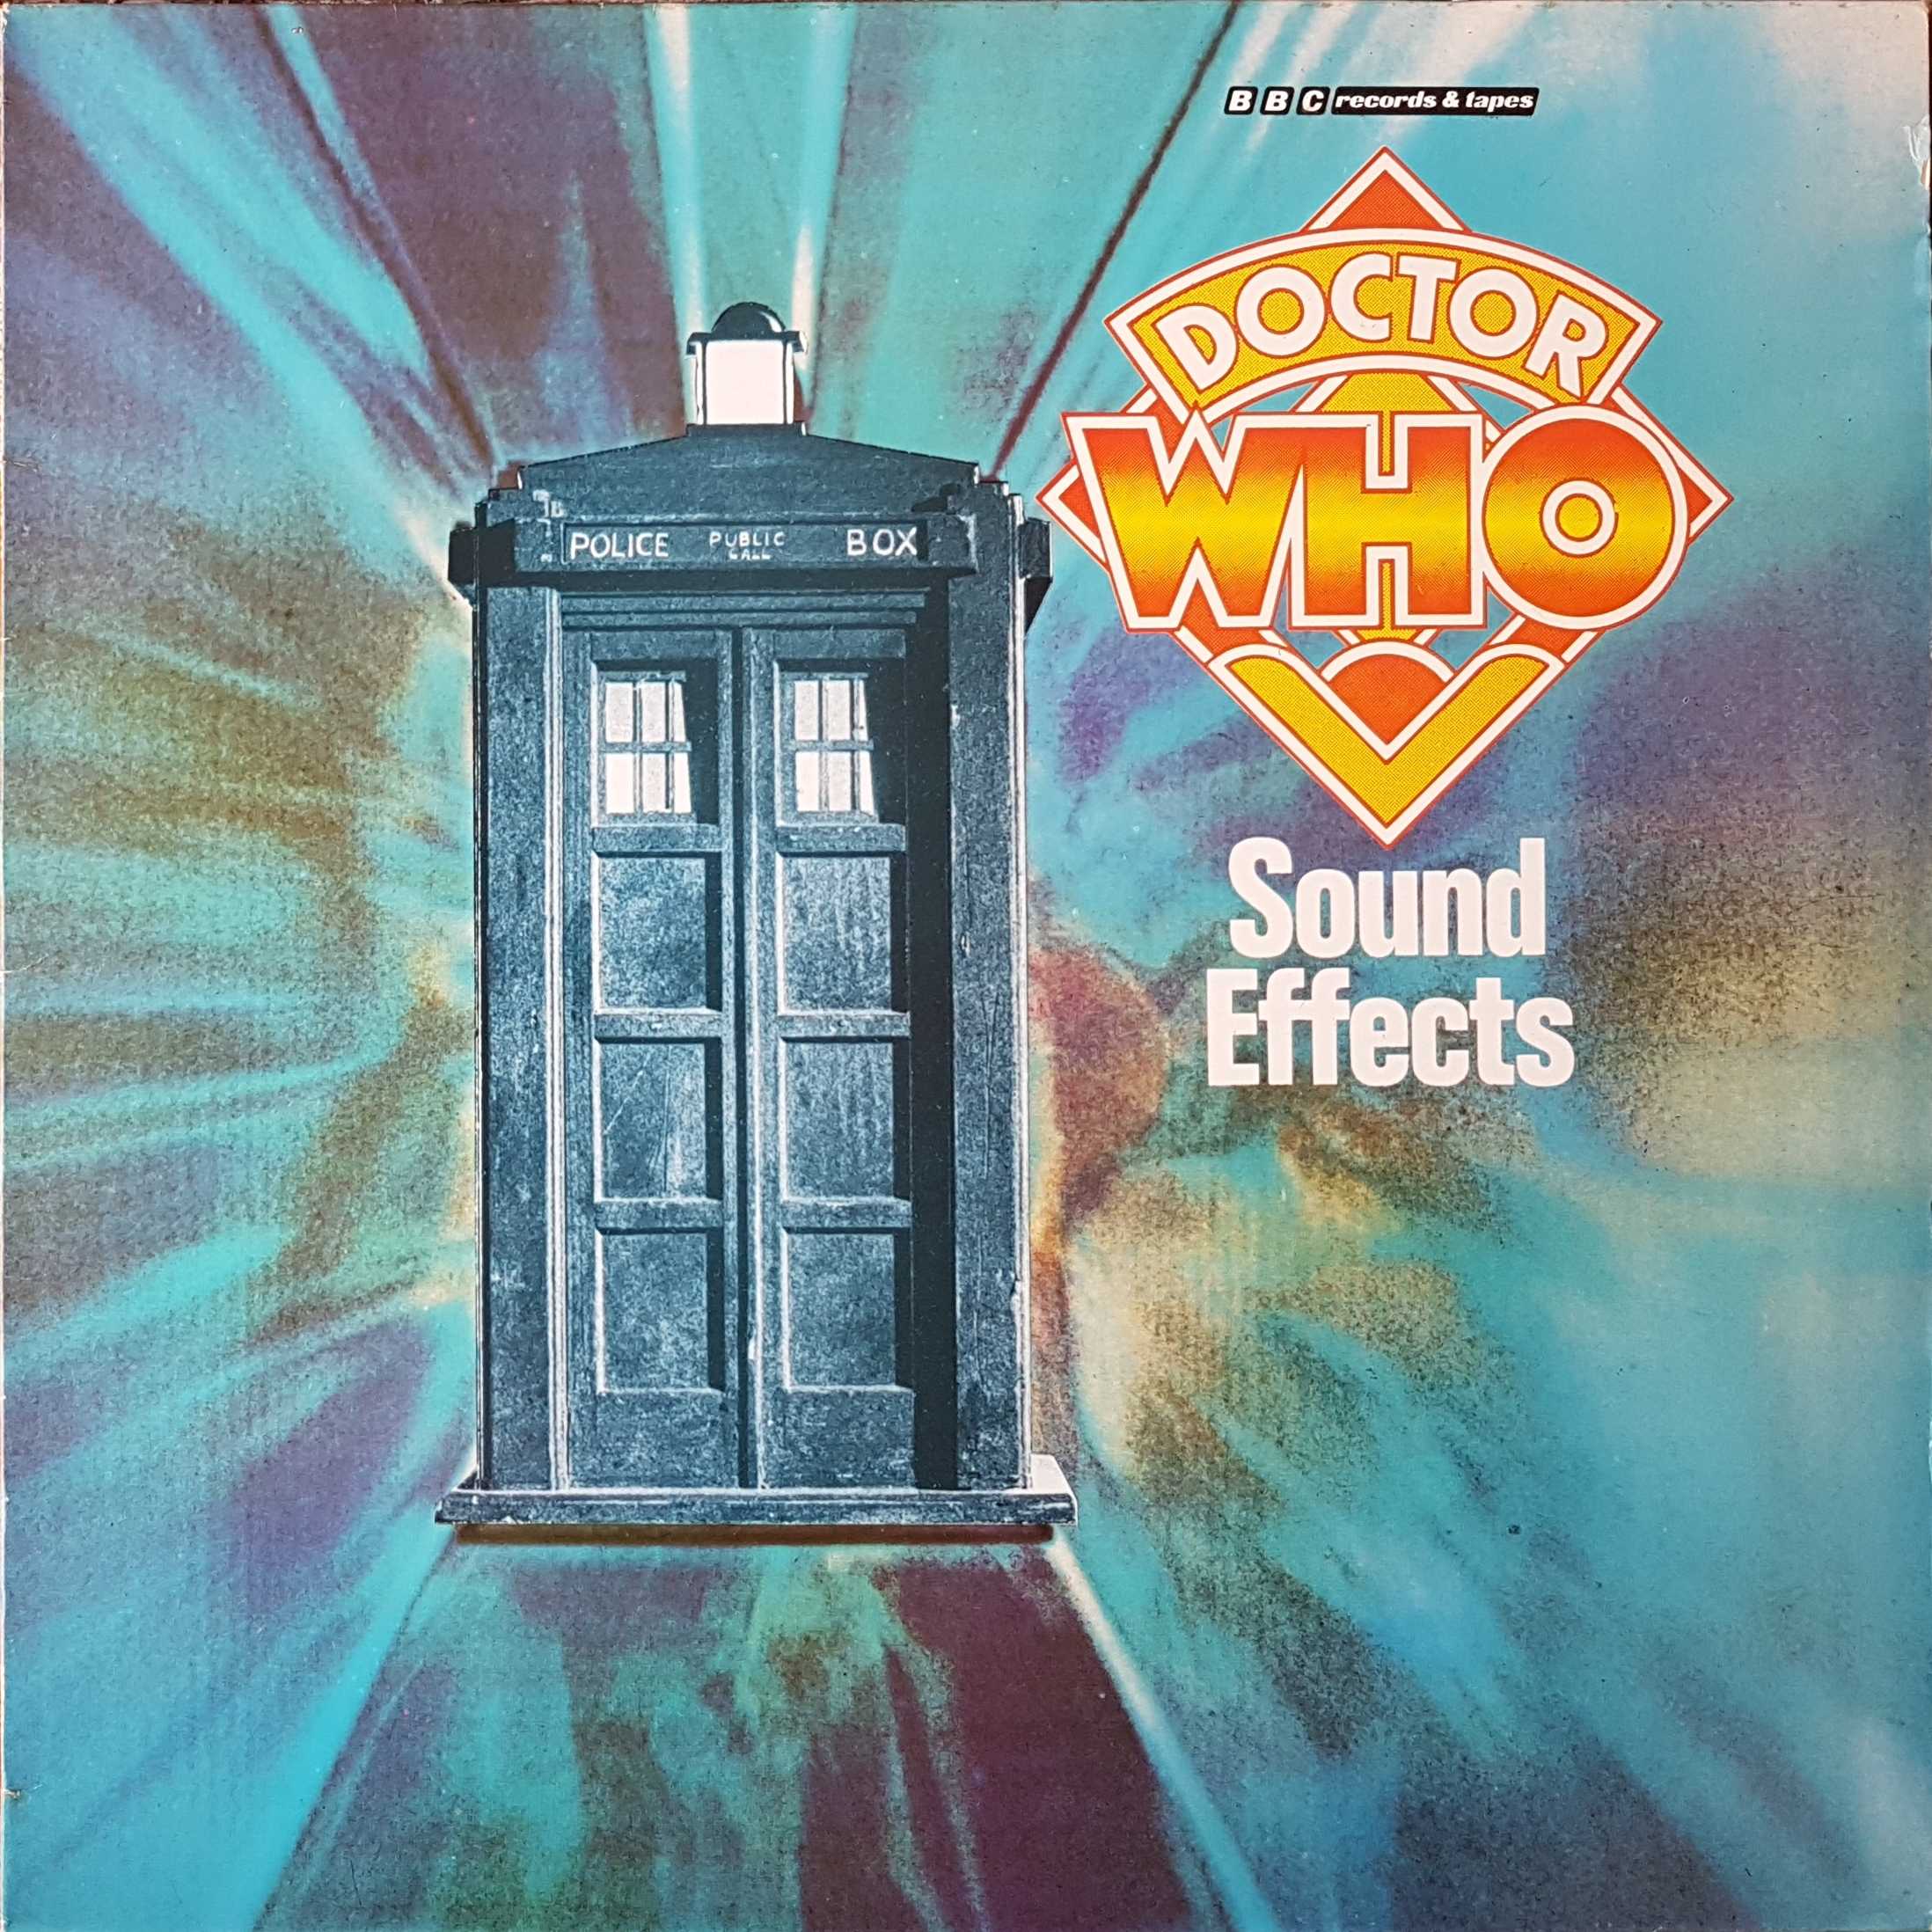 Picture of REC 316 Doctor Who sound effects by artist BBC radiophonic workshop from the BBC records and Tapes library